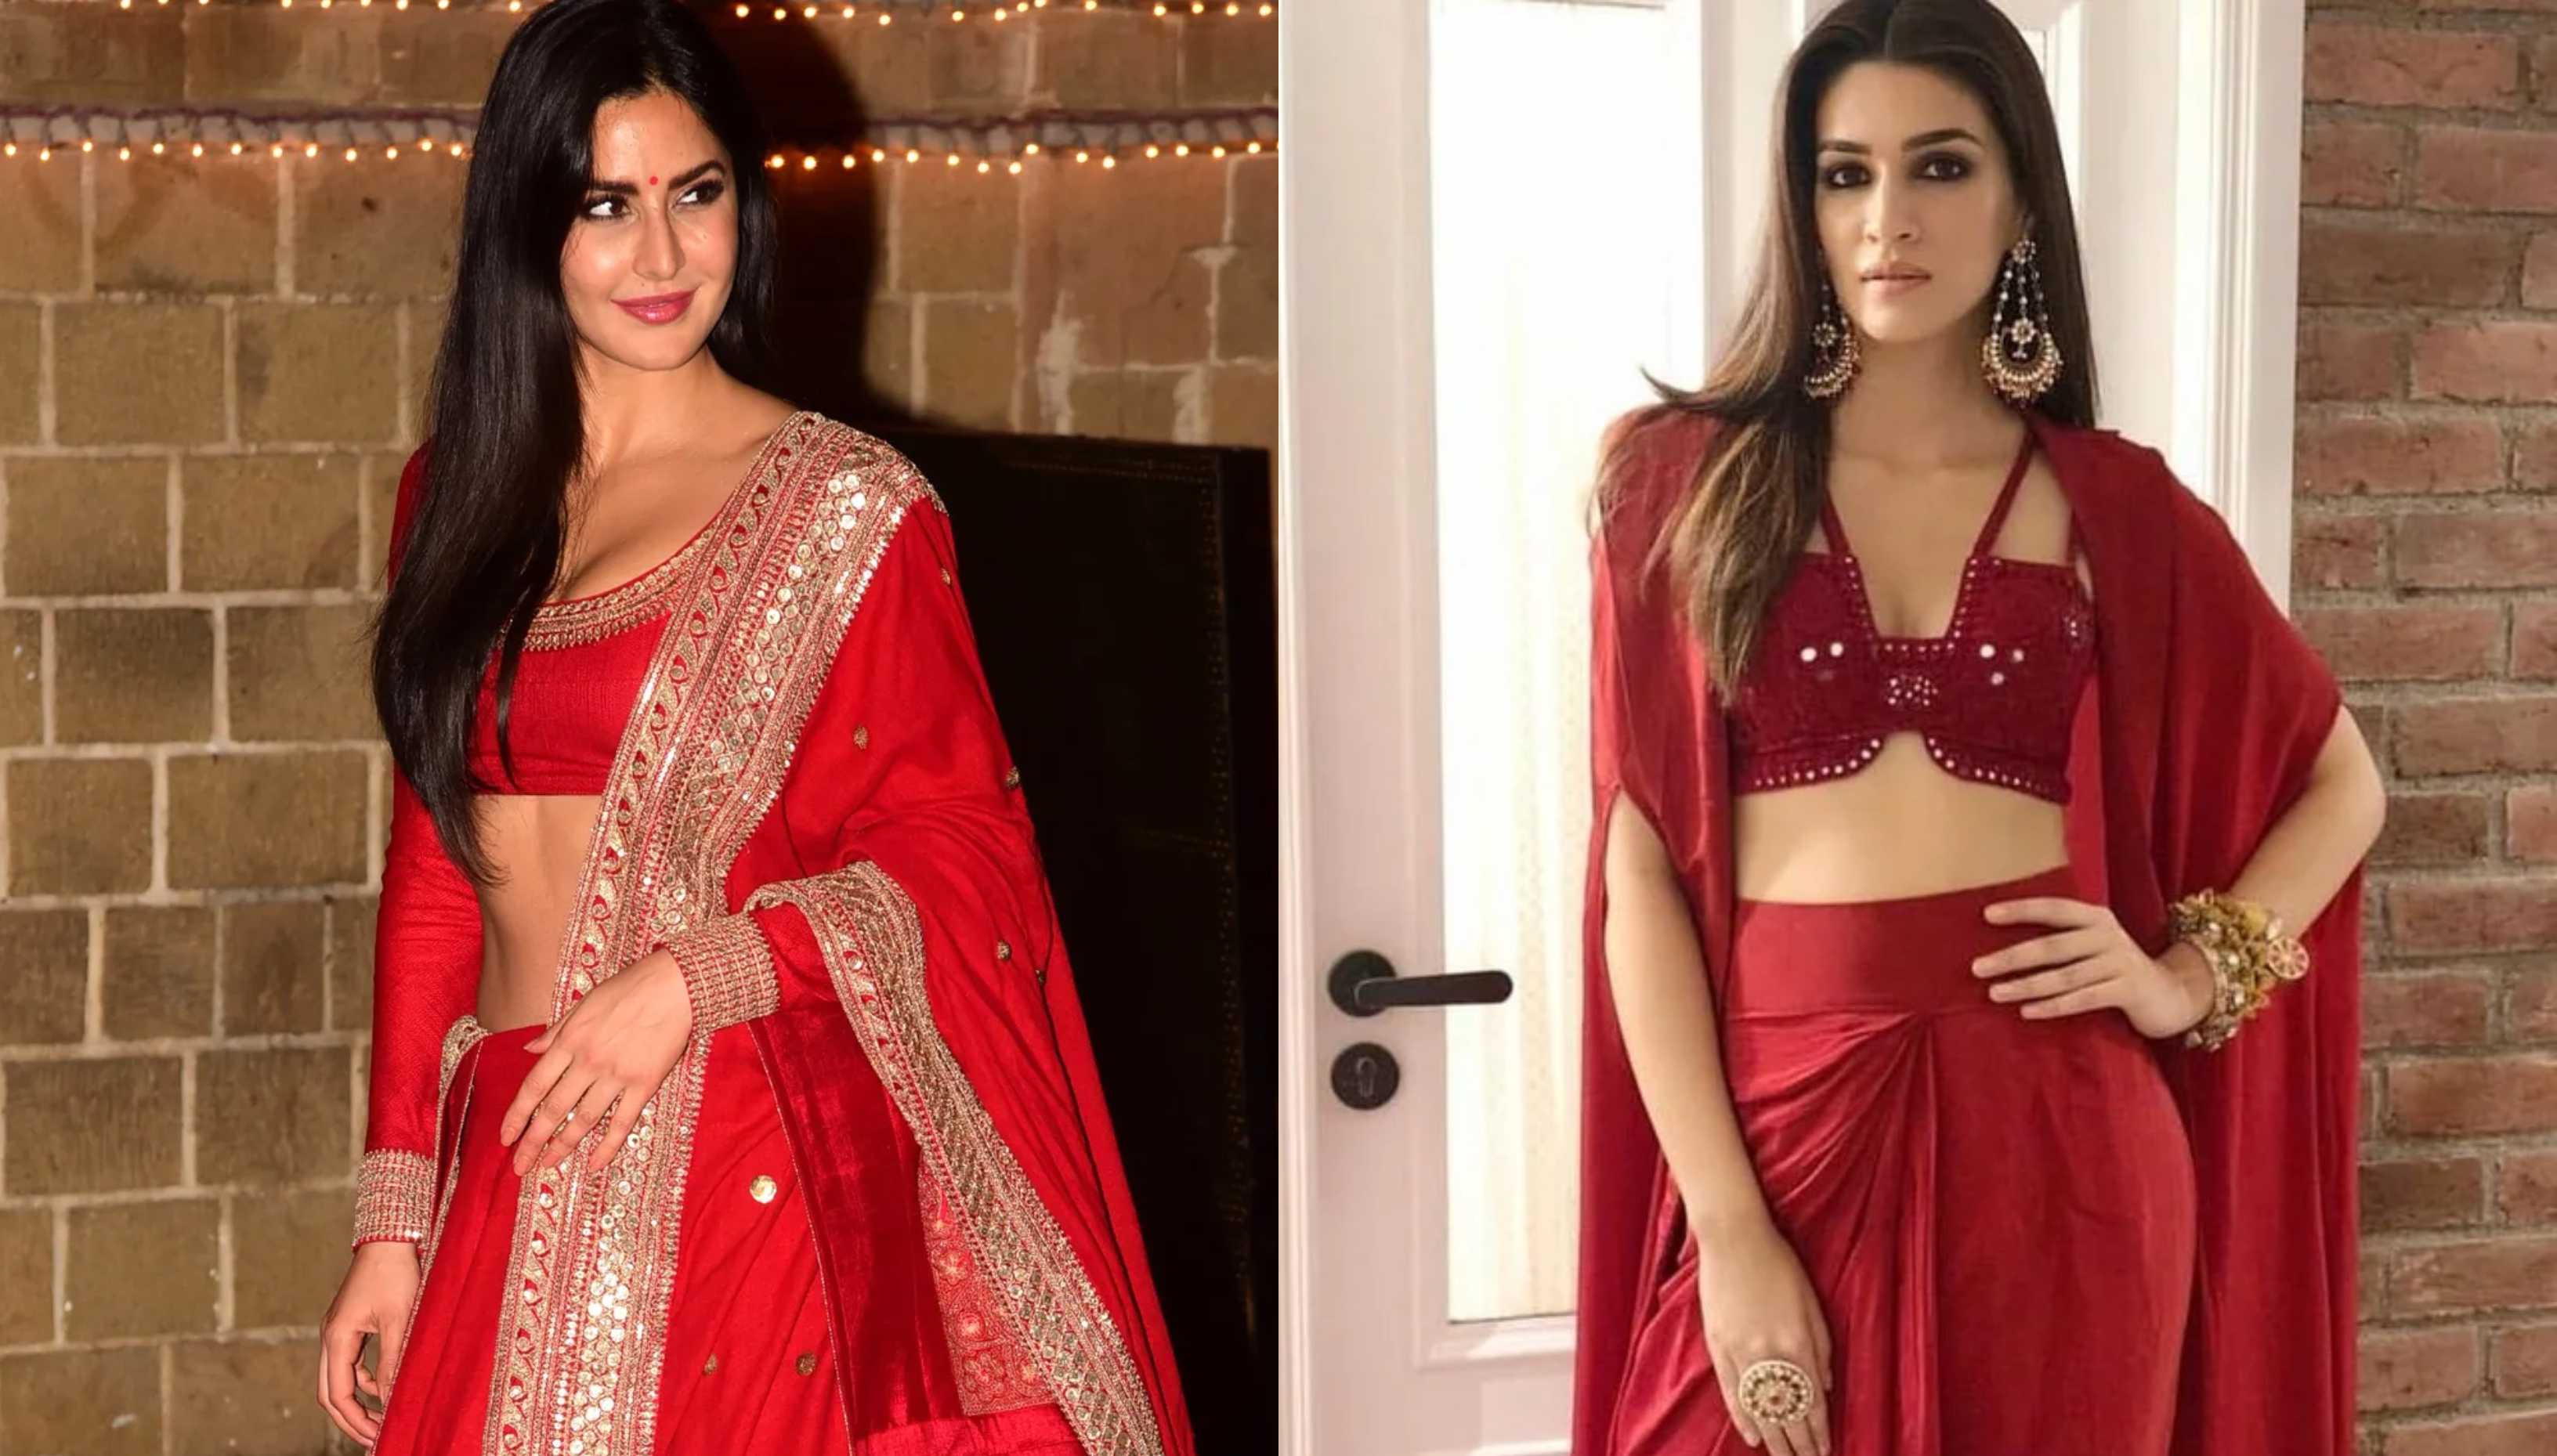 Navratri Day 2: From Katrina Kaif to Kriti Sanon, learn how to slay in red from these Bollywood beauties